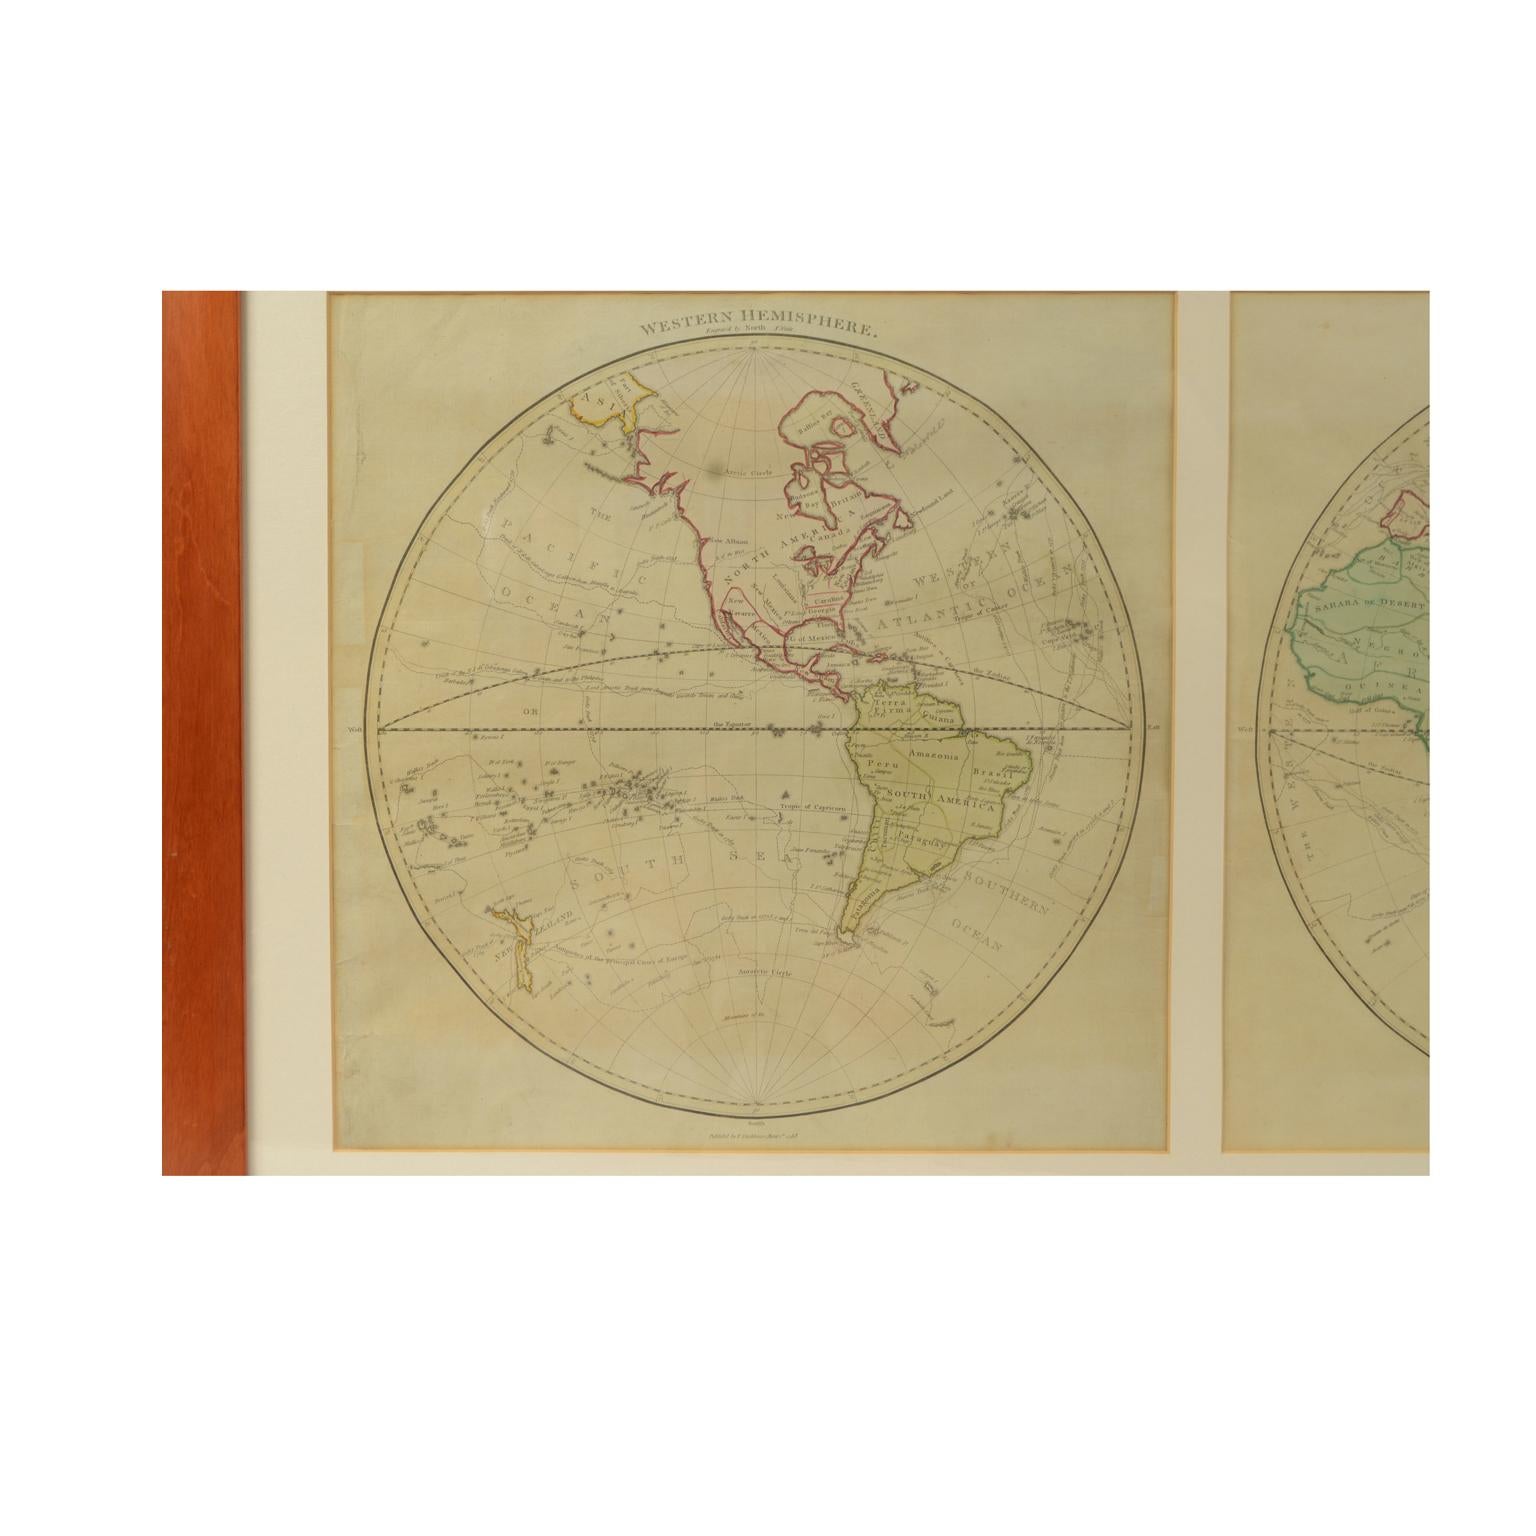 Late 18th Century World Map Published in June 1783 by Stackhouse and Engraved by S.J. Neele London